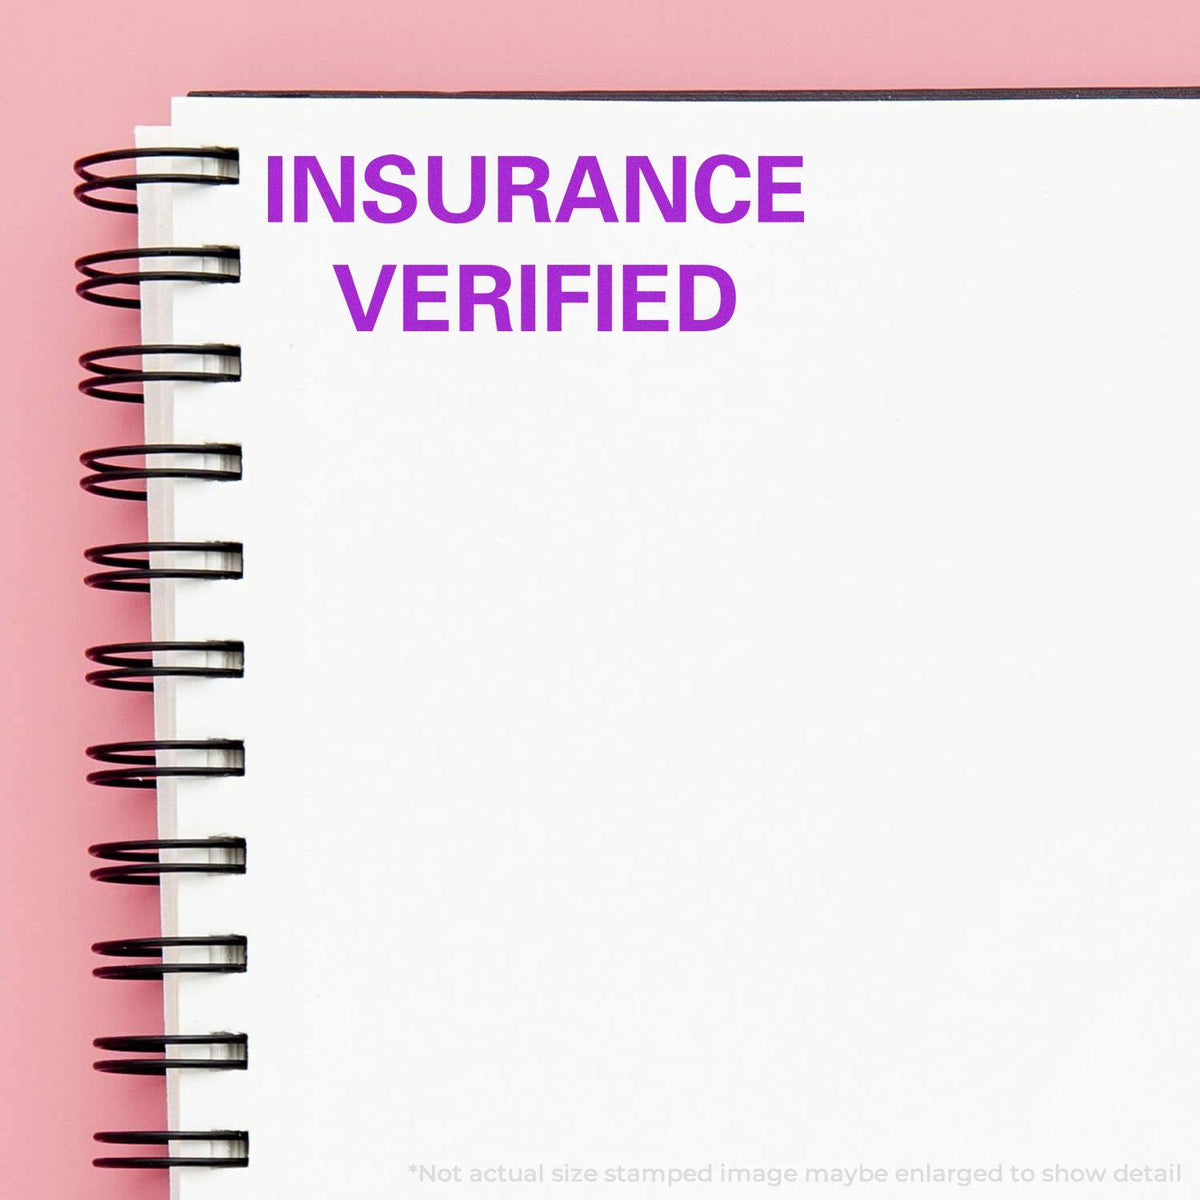 In Use Large Pre-Inked Insurance Verified Stamp Image